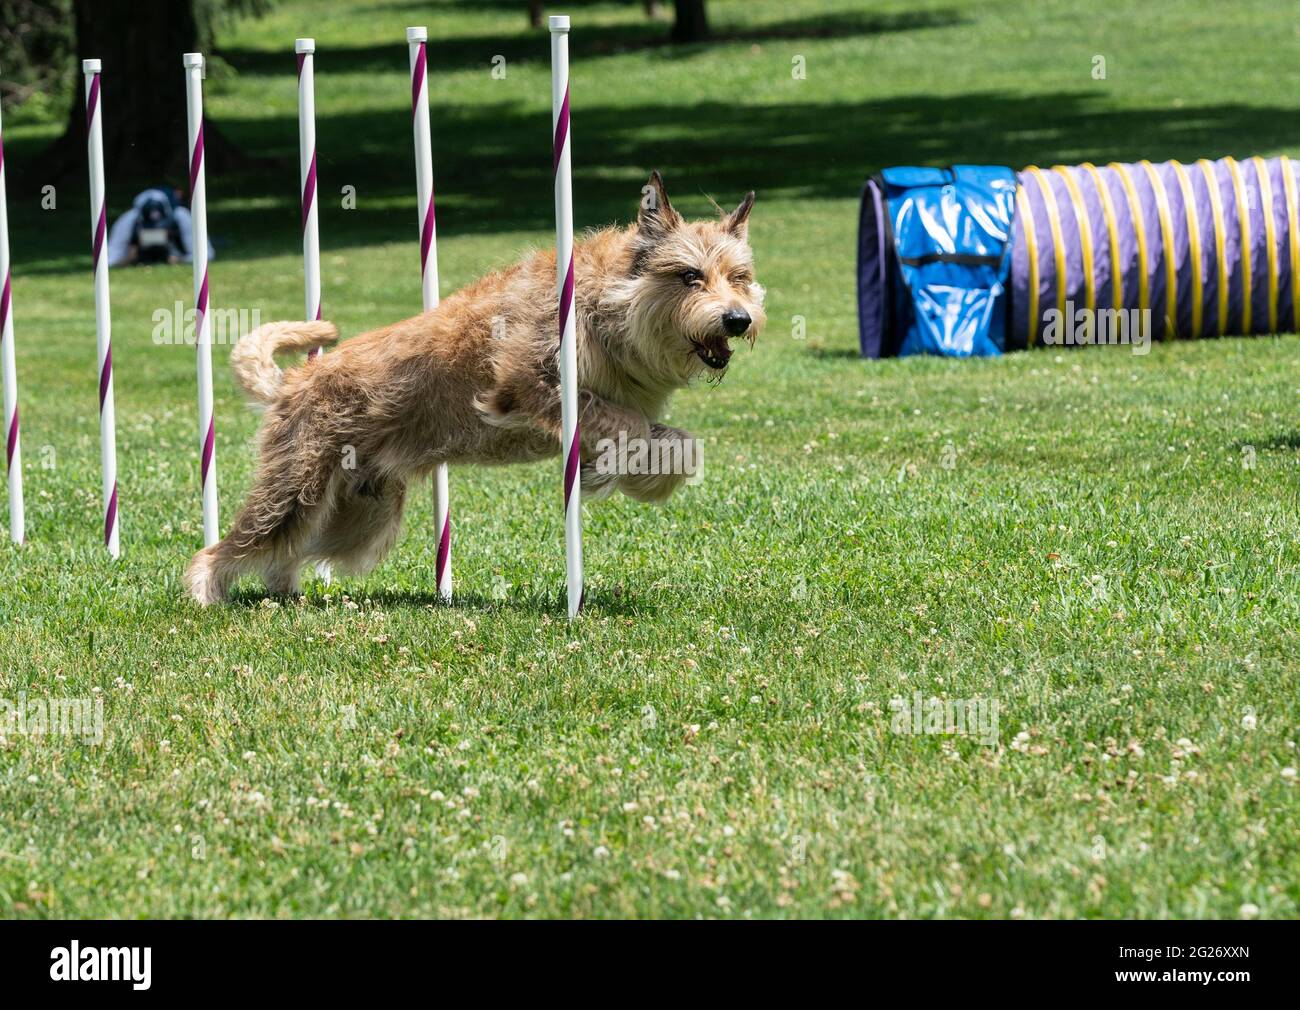 Tarrytown, United States. 08th June, 2021. Berger Picard named Chester runs through the agility course during demonstration at 145th Annual Westminster Kennel Club Dog Show Press Preview at Lyndhurst Estate in Tarrytown on June 8, 2021. Annual Westminster Kennel Club Dog Show was canceled in 2020 because of COVID-19 pandemic and moved this year to open space at Lyndhurst Estate outside of New York City. (Photo by Lev Radin/Sipa USA) Credit: Sipa USA/Alamy Live News Stock Photo